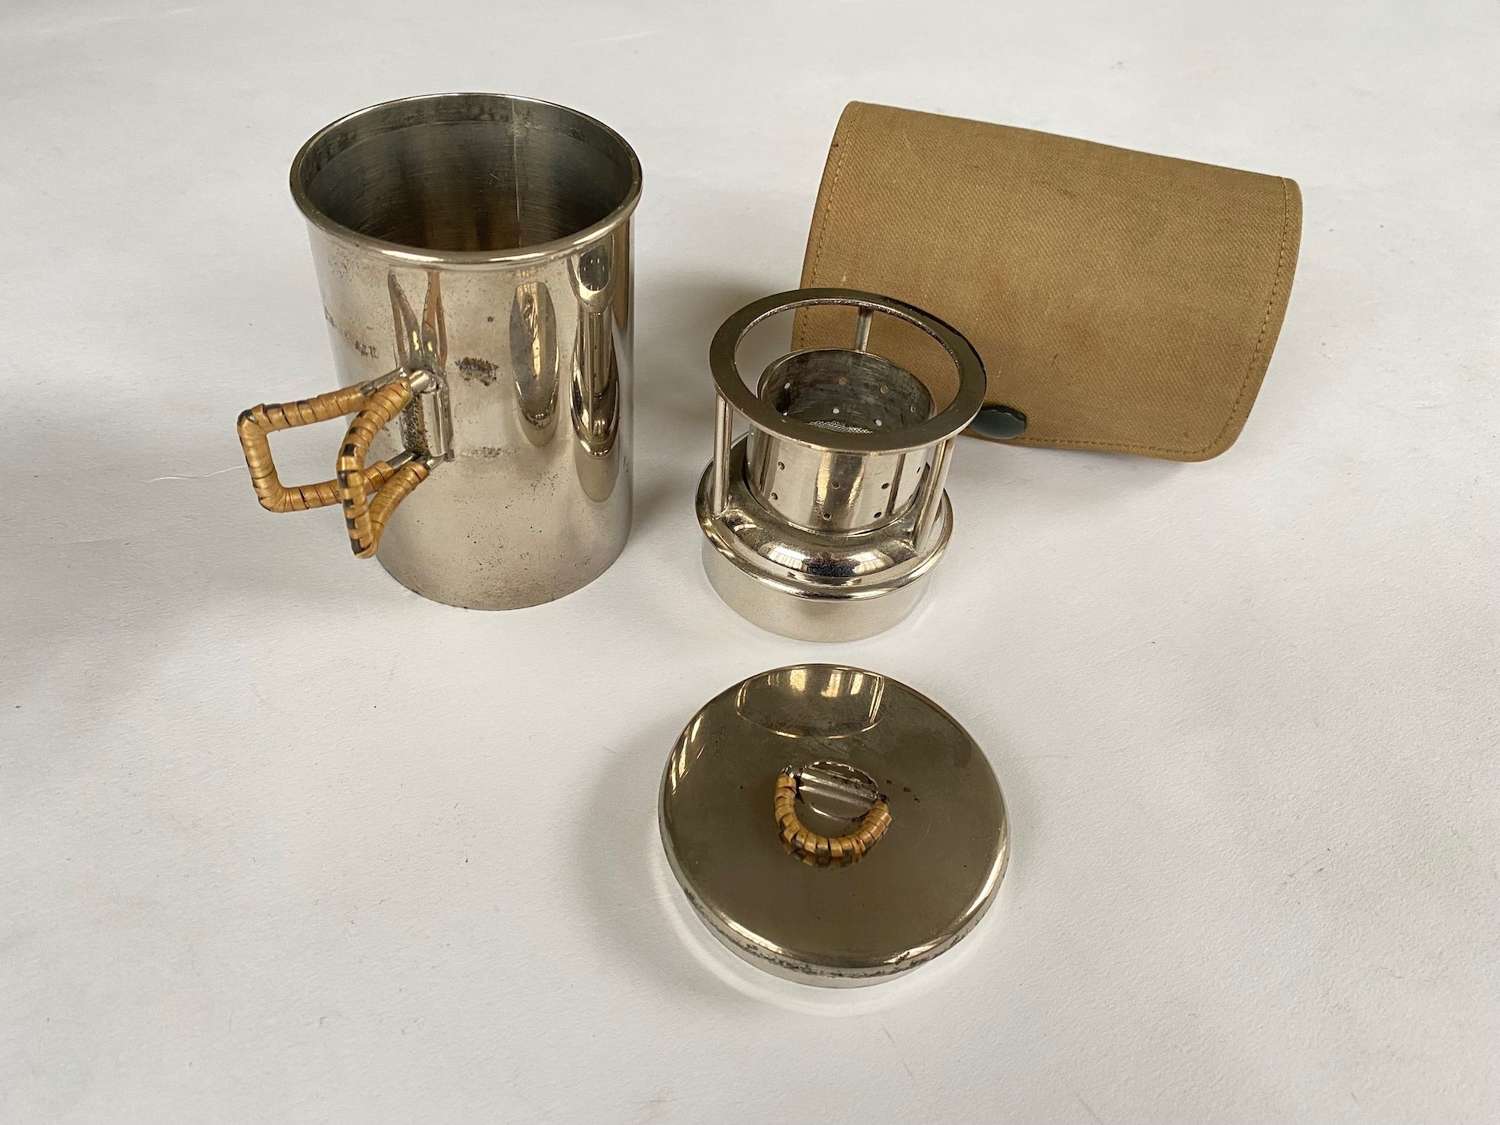 WW1 Superior Quality Officer’s Spirit Stove by Asprey of London.